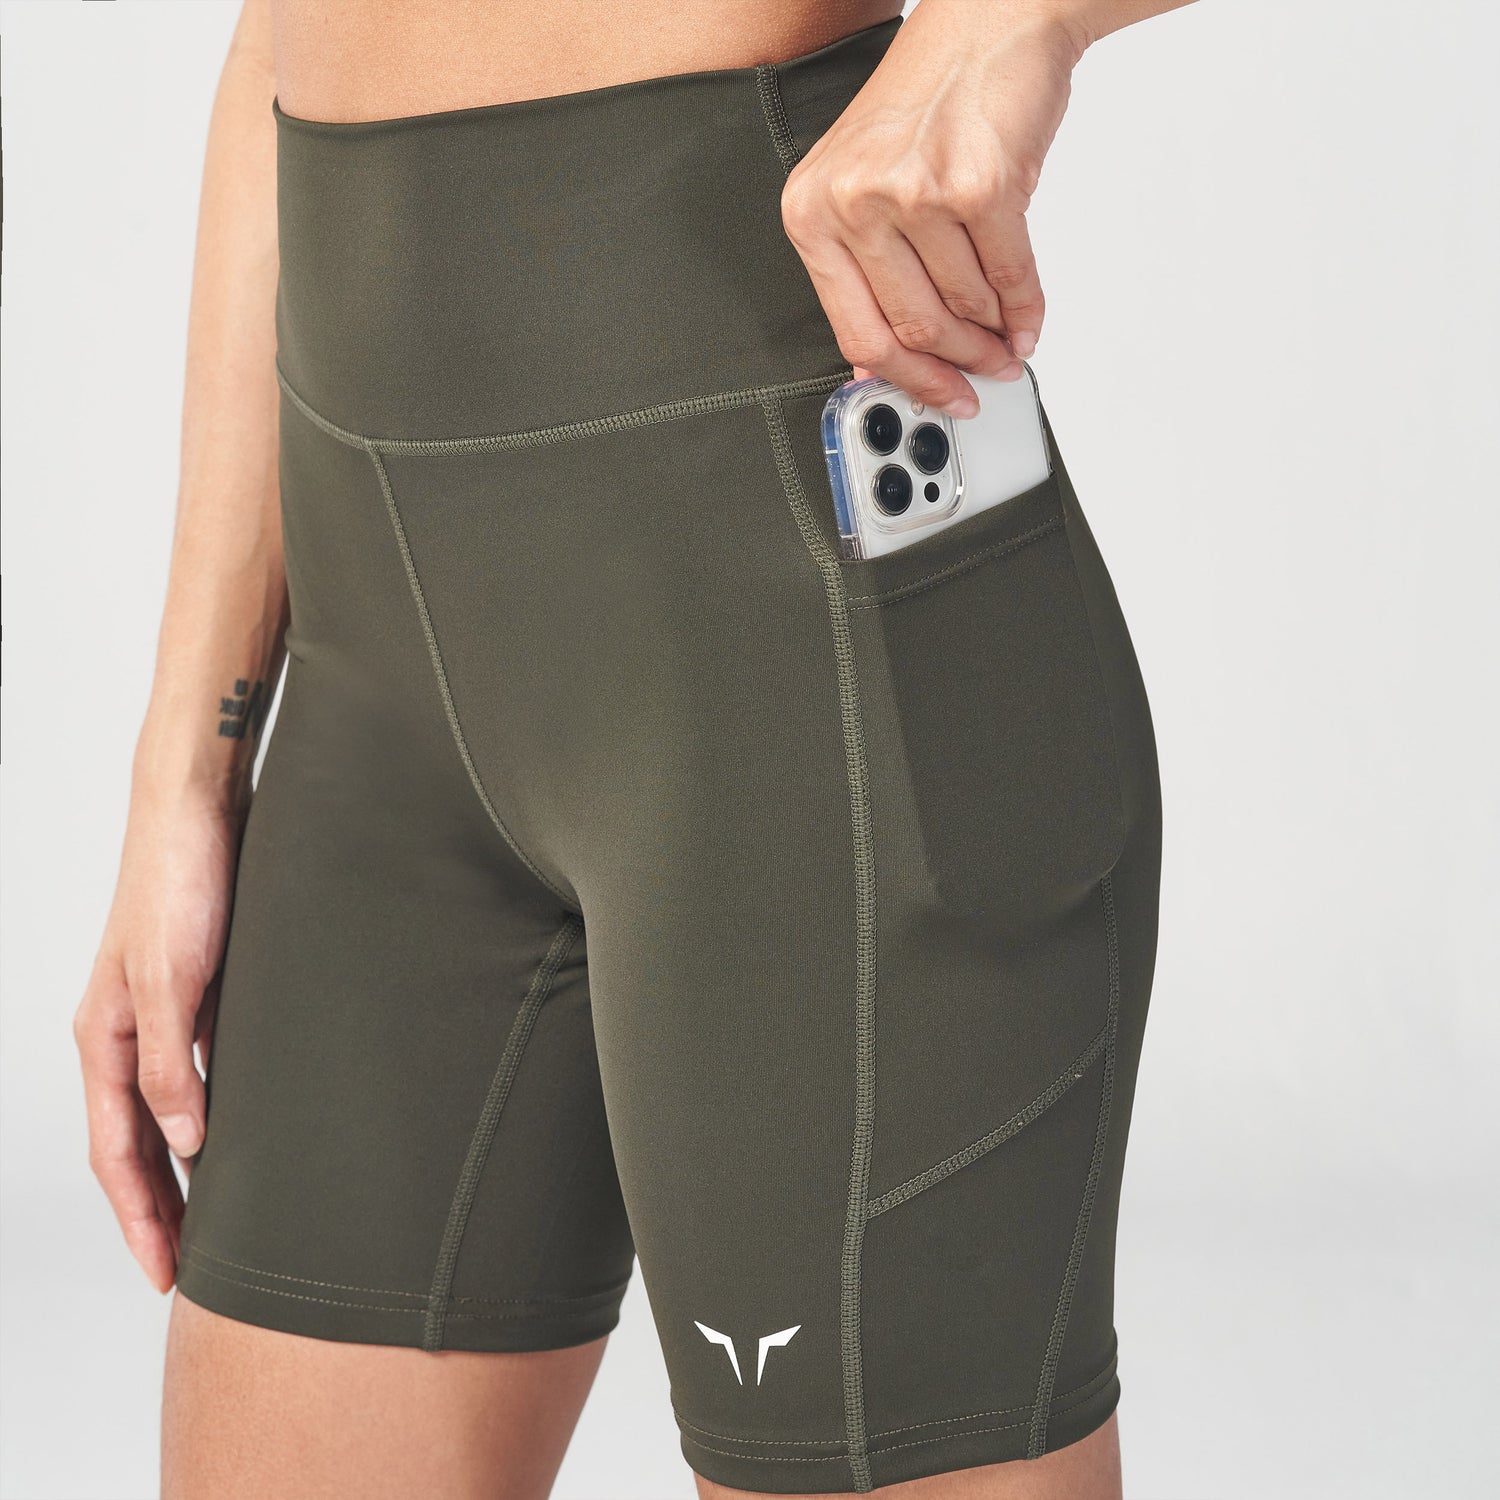 squatwolf-workout-clothes-essential-7-cycling-short-khaki-gym-shorts-for-women